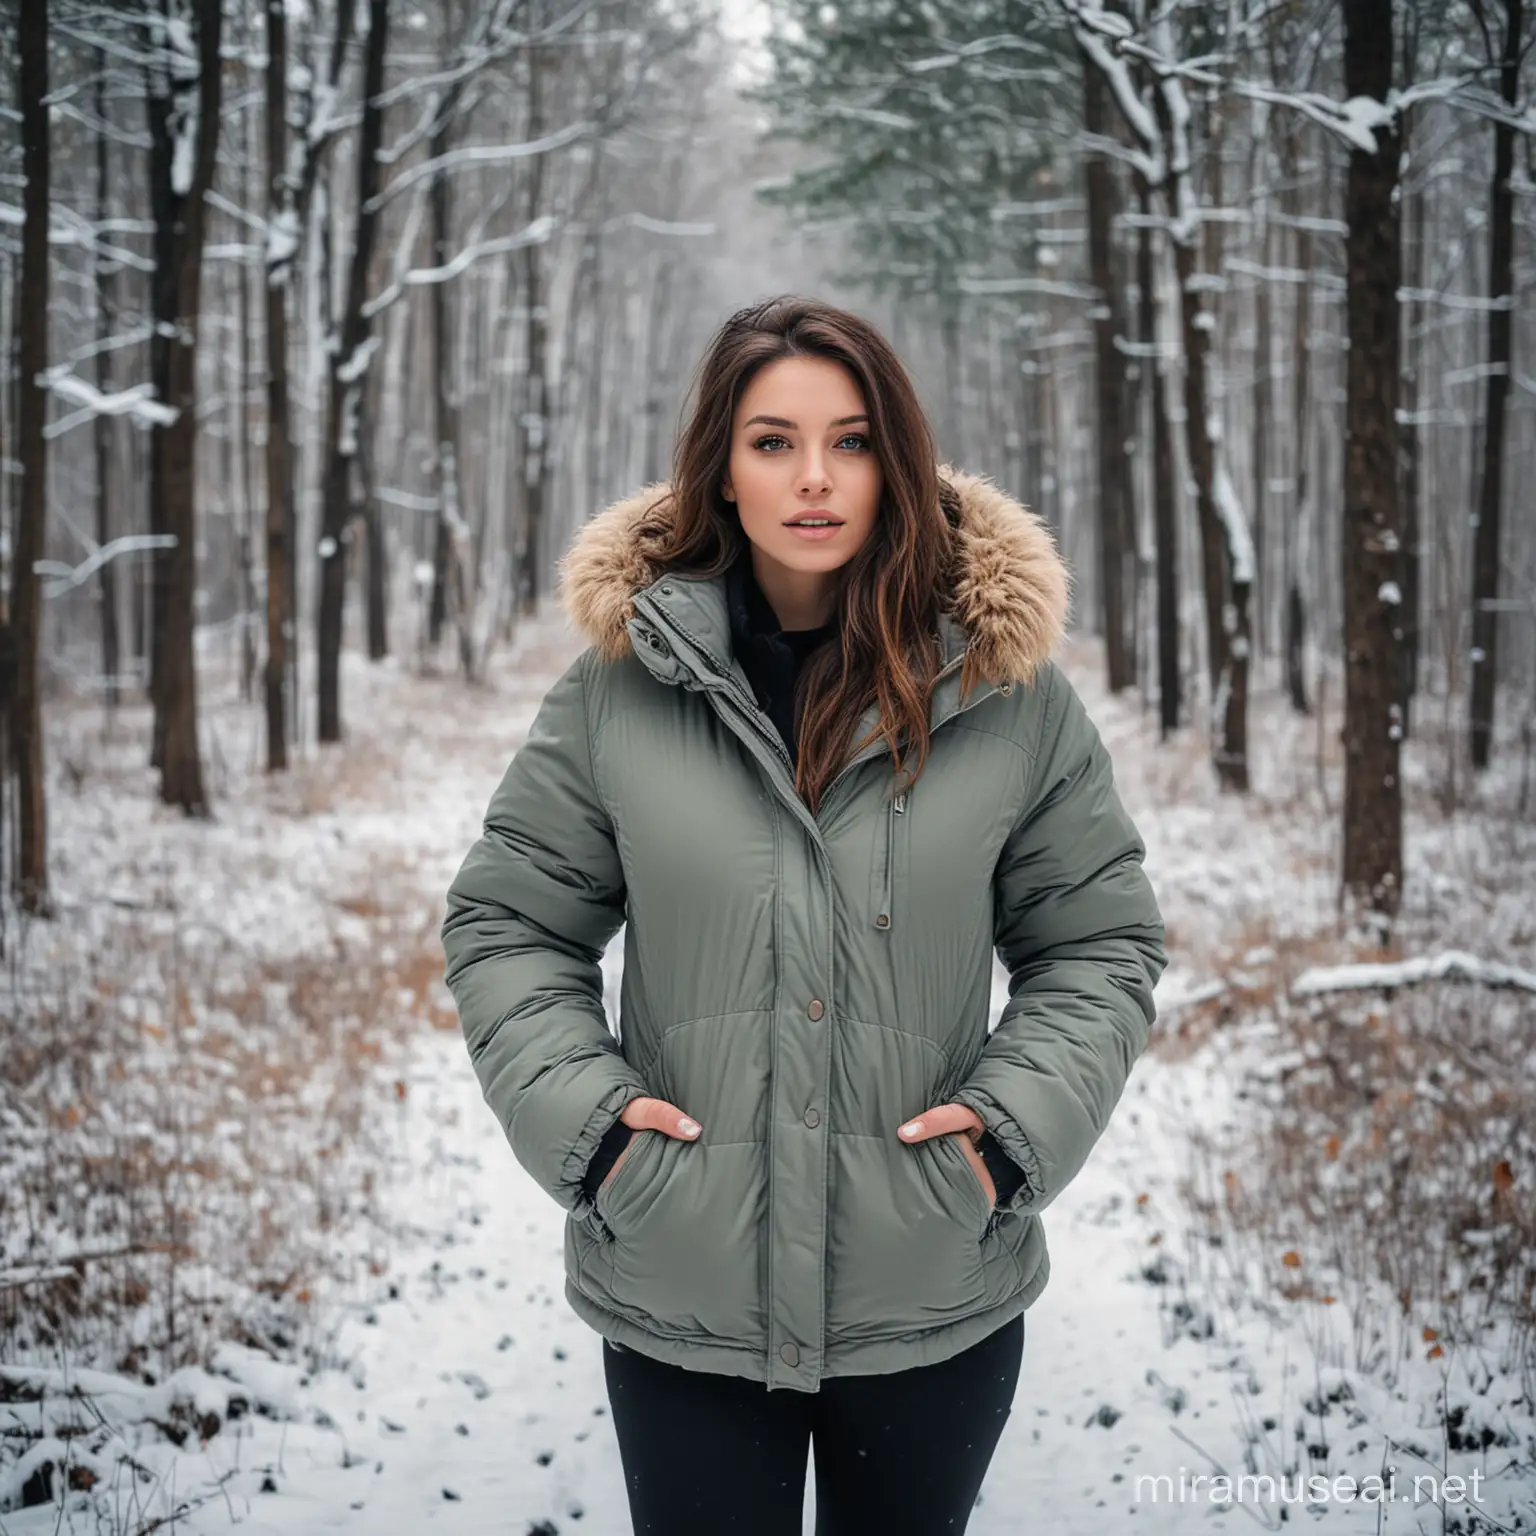 beautiful woman standing cold wearing a thick jacket in the snow in the forest